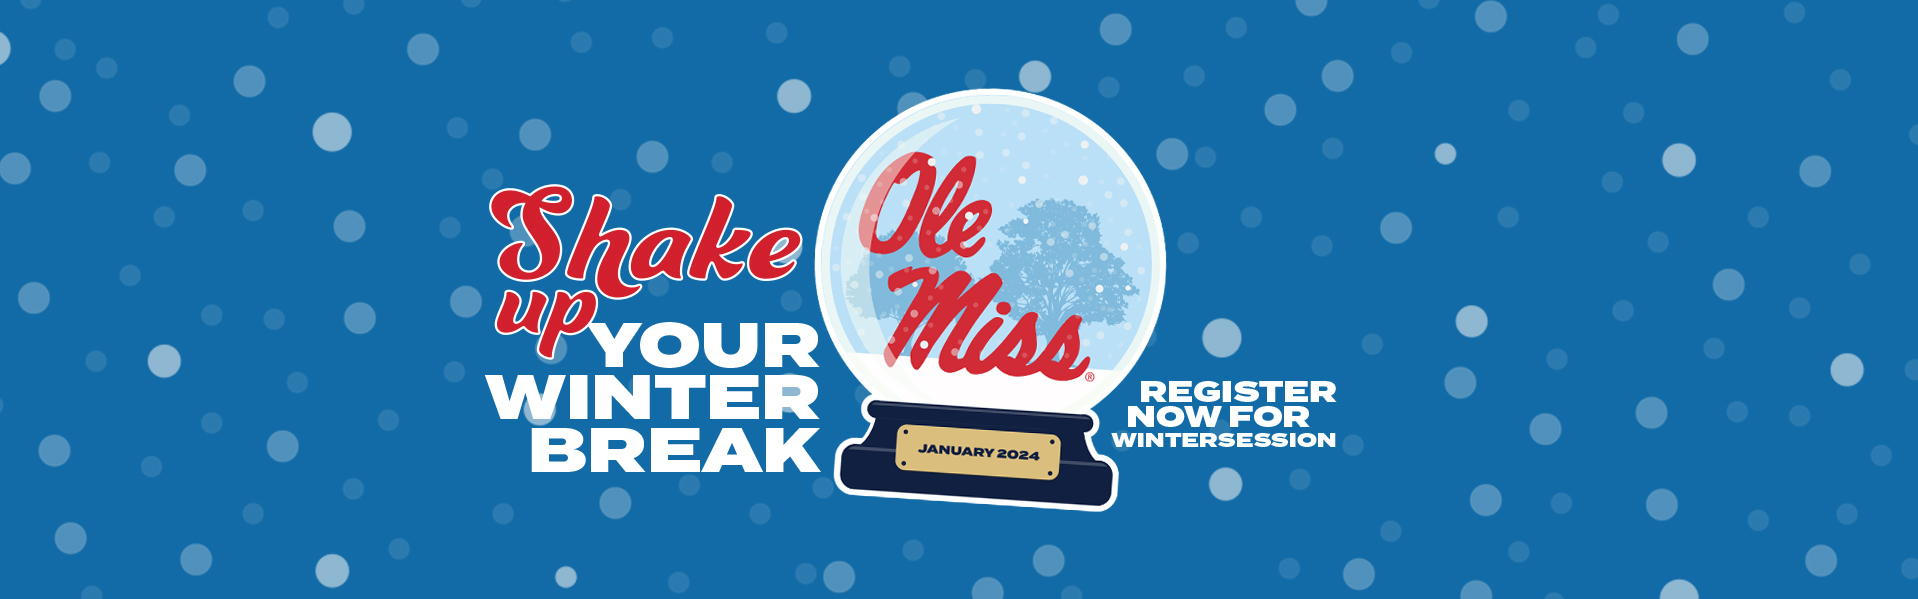 Wintersession at Ole Miss inside a Snow Globe